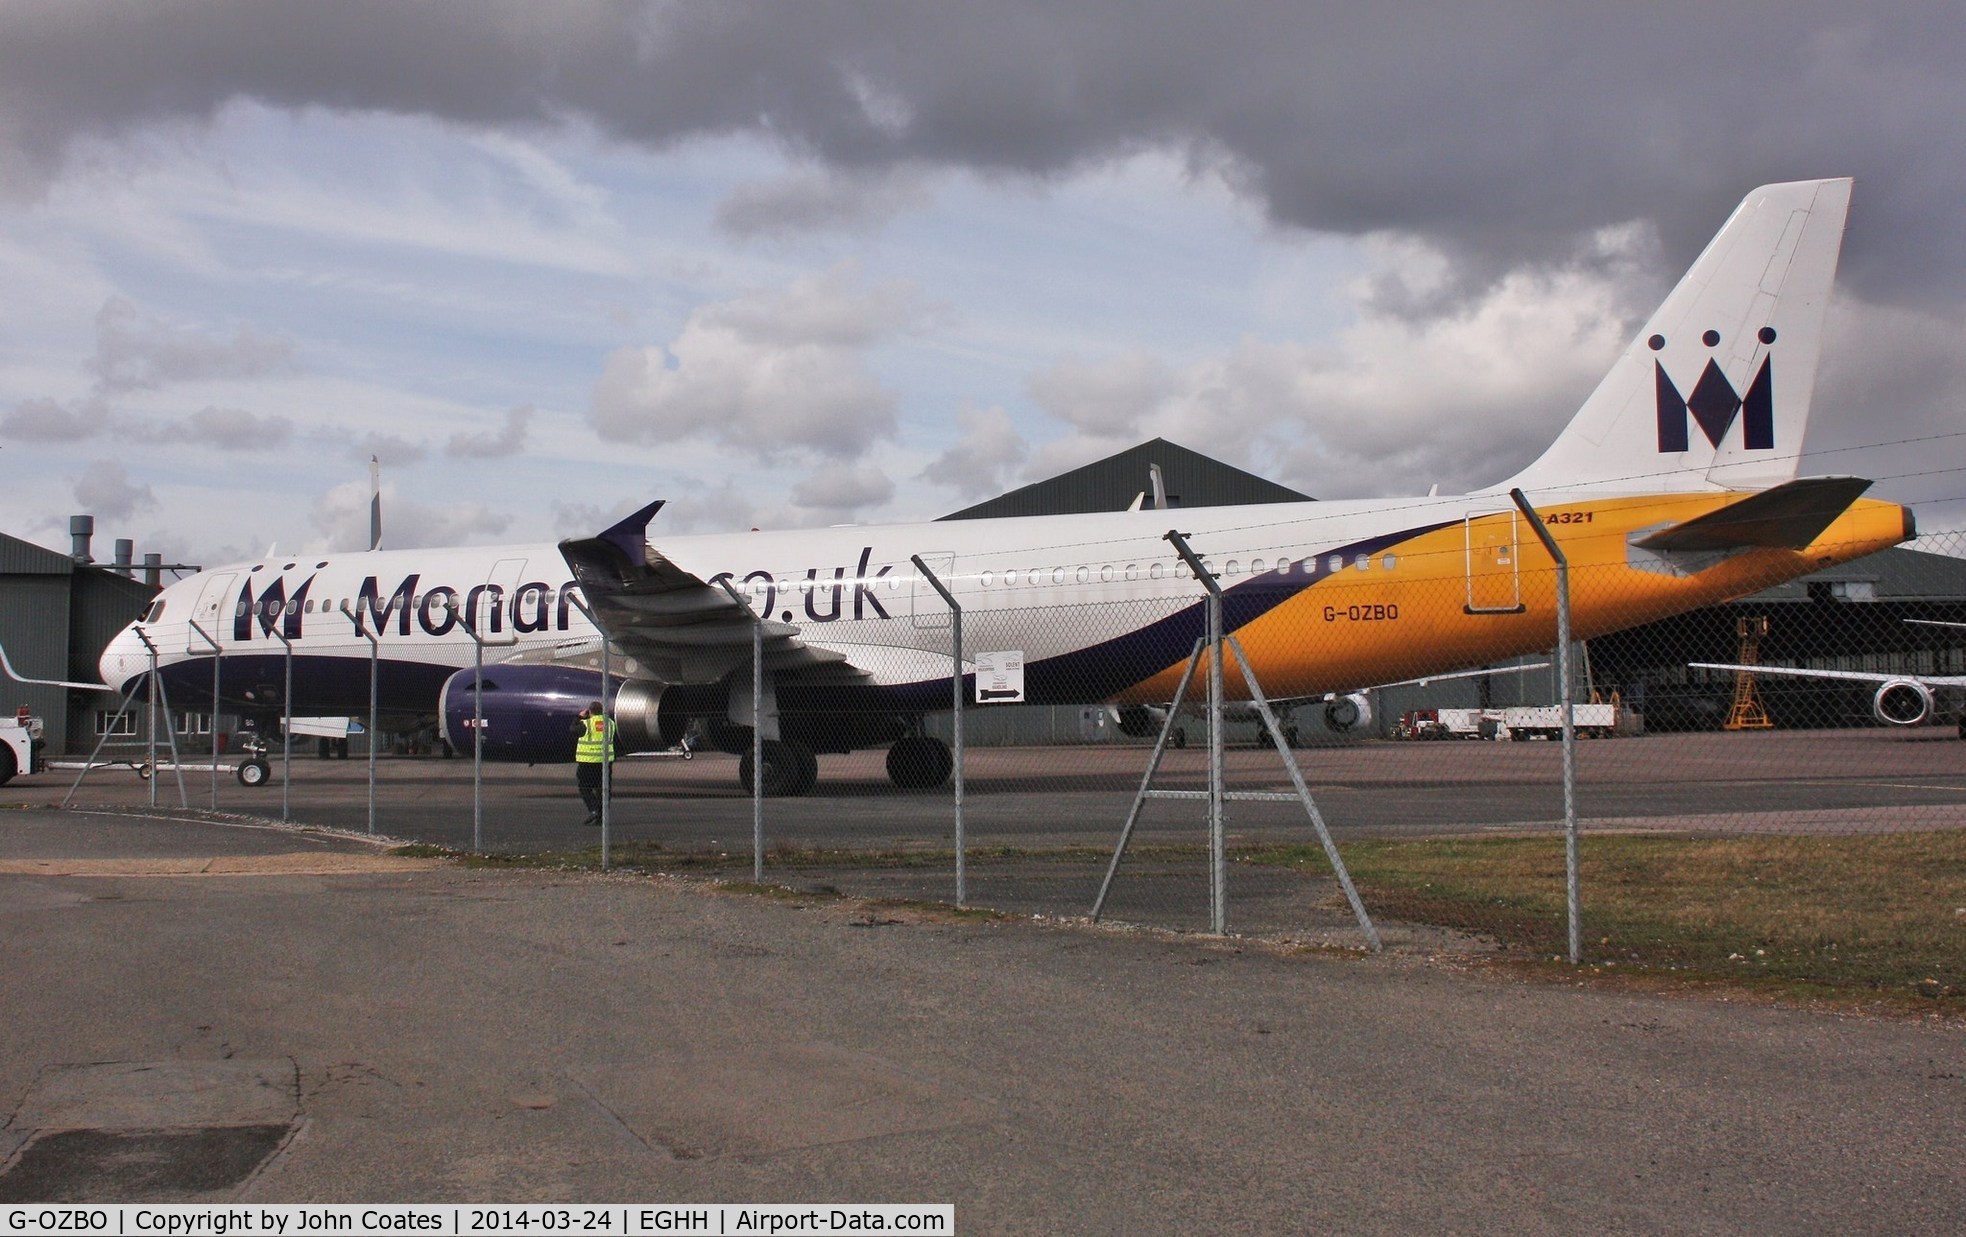 G-OZBO, 2000 Airbus A321-231 C/N 1207, At paintshop for latest livery